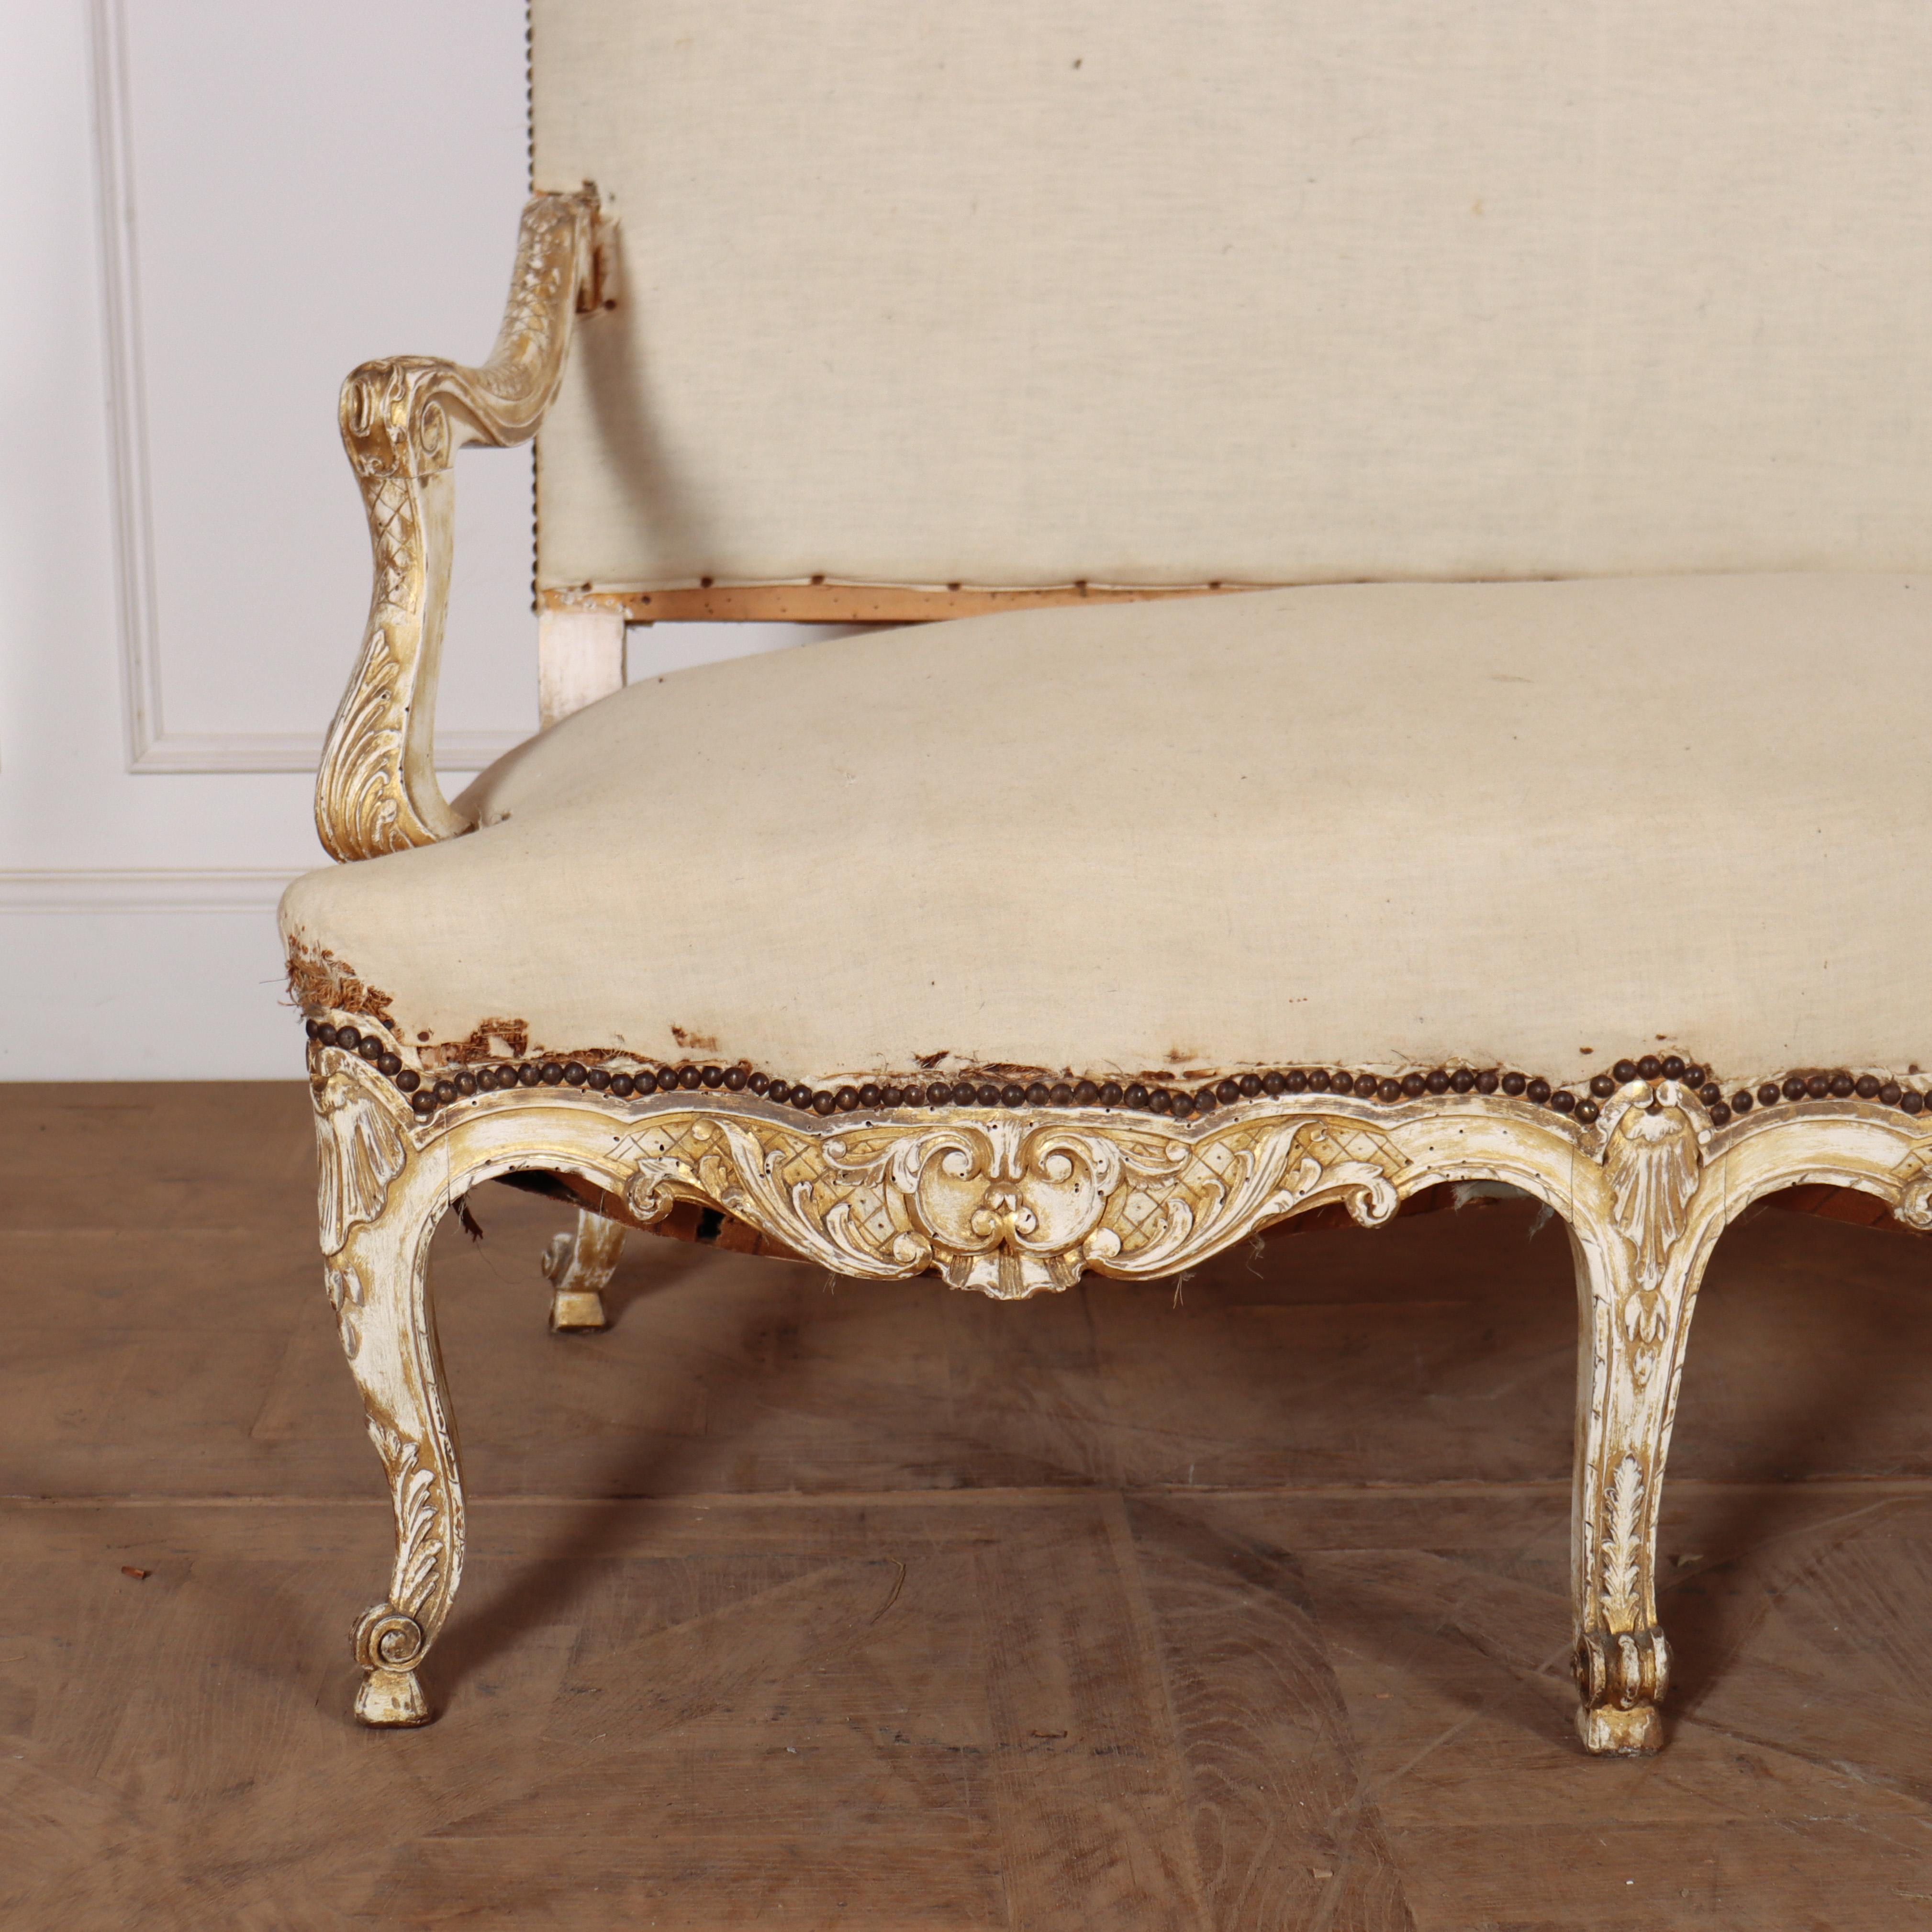 Late 19th C French canape sofa with serpentine seat. 1890.

Seat height is 20 inches.
Seat depth is 25 inches.

Reference: 8015

Dimensions
73 inches (185 cms) Wide
33 inches (84 cms) Deep
45 inches (114 cms) High